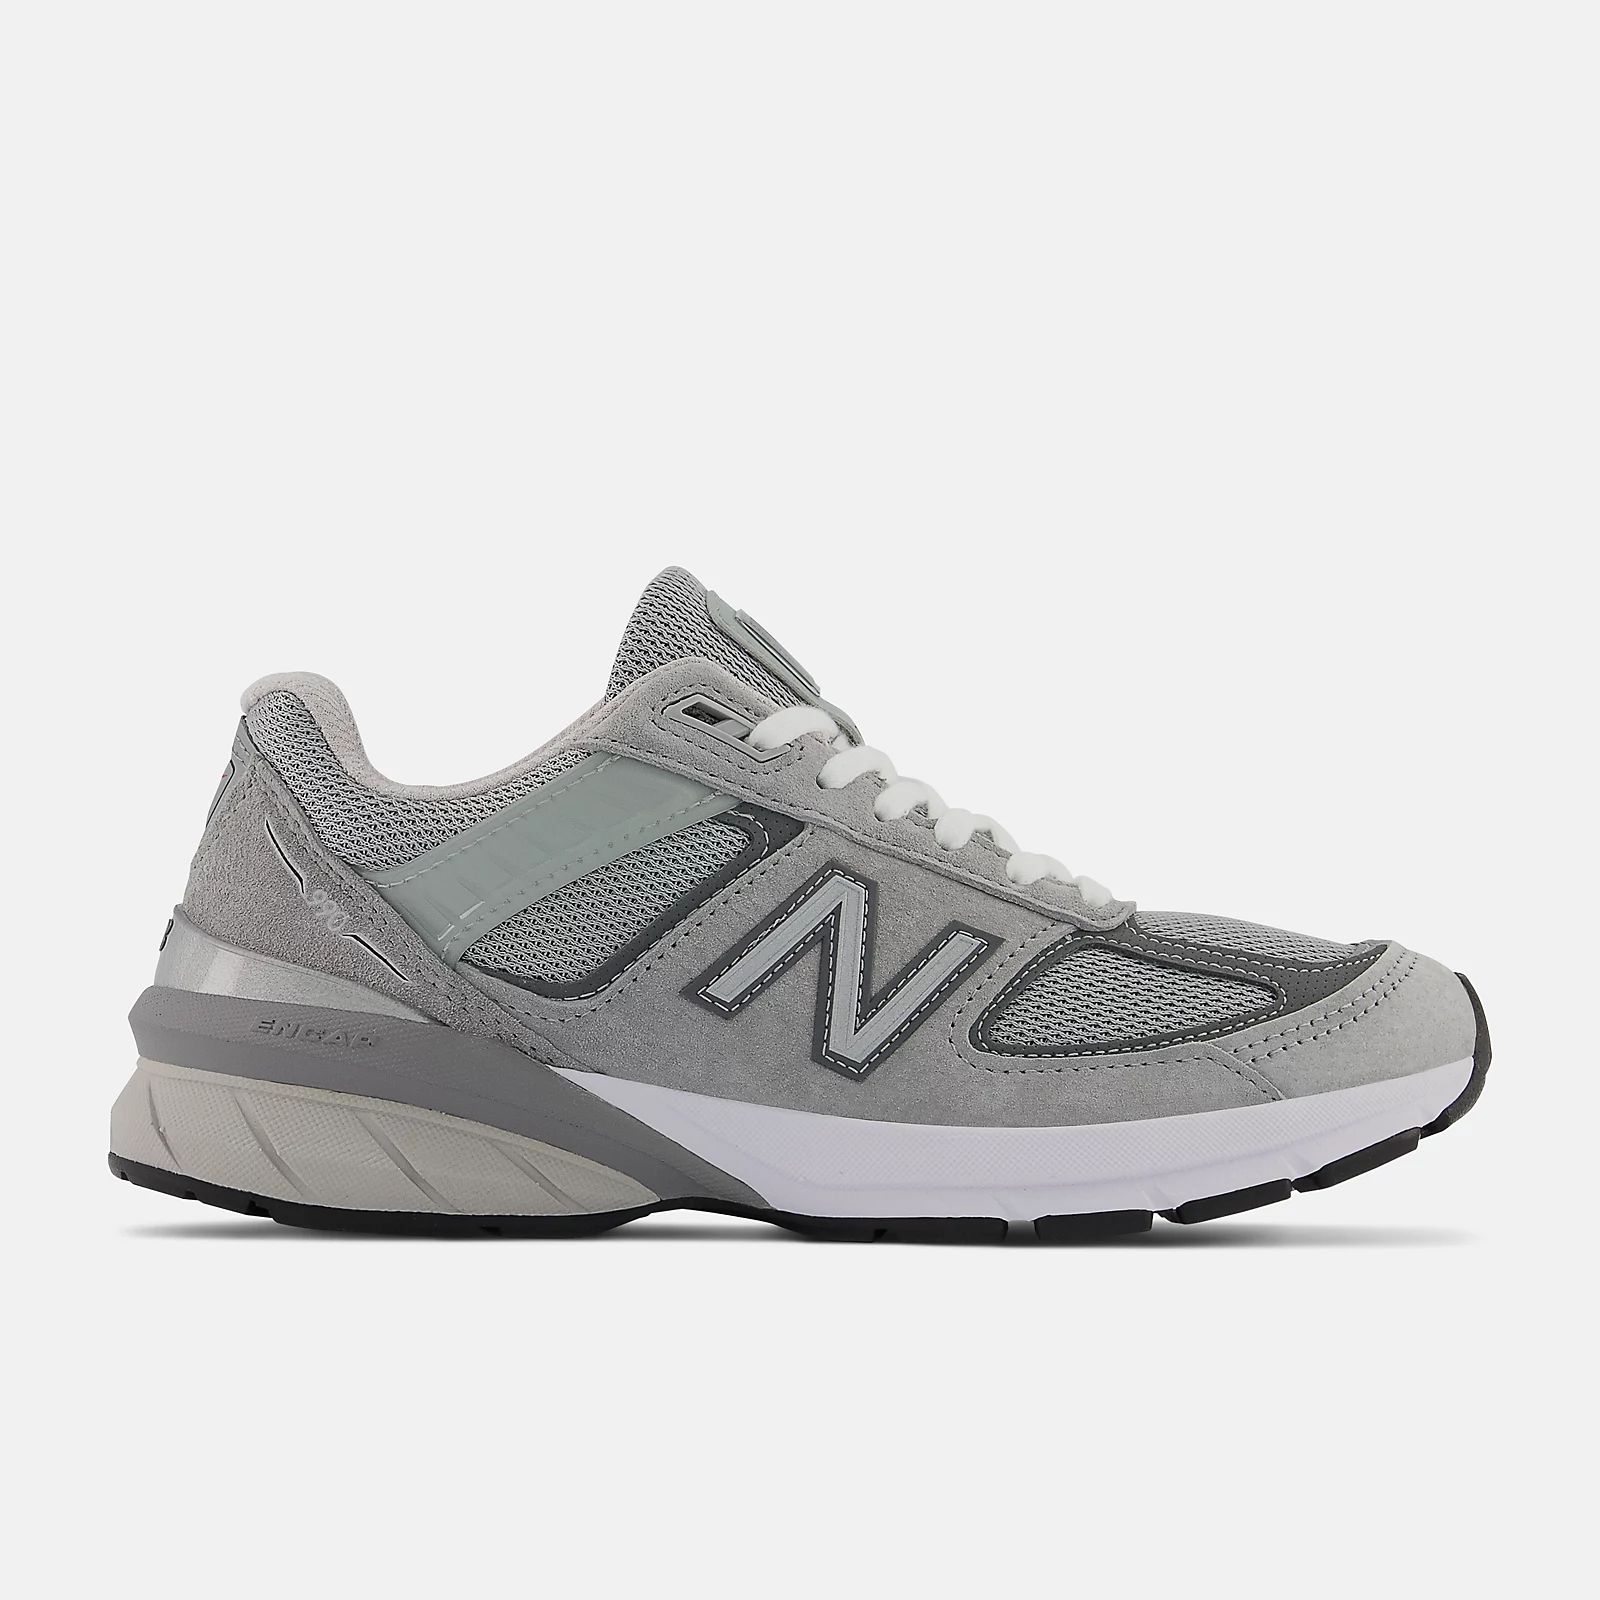 Made in USA 990v5 Core | New Balance Athletic Shoe